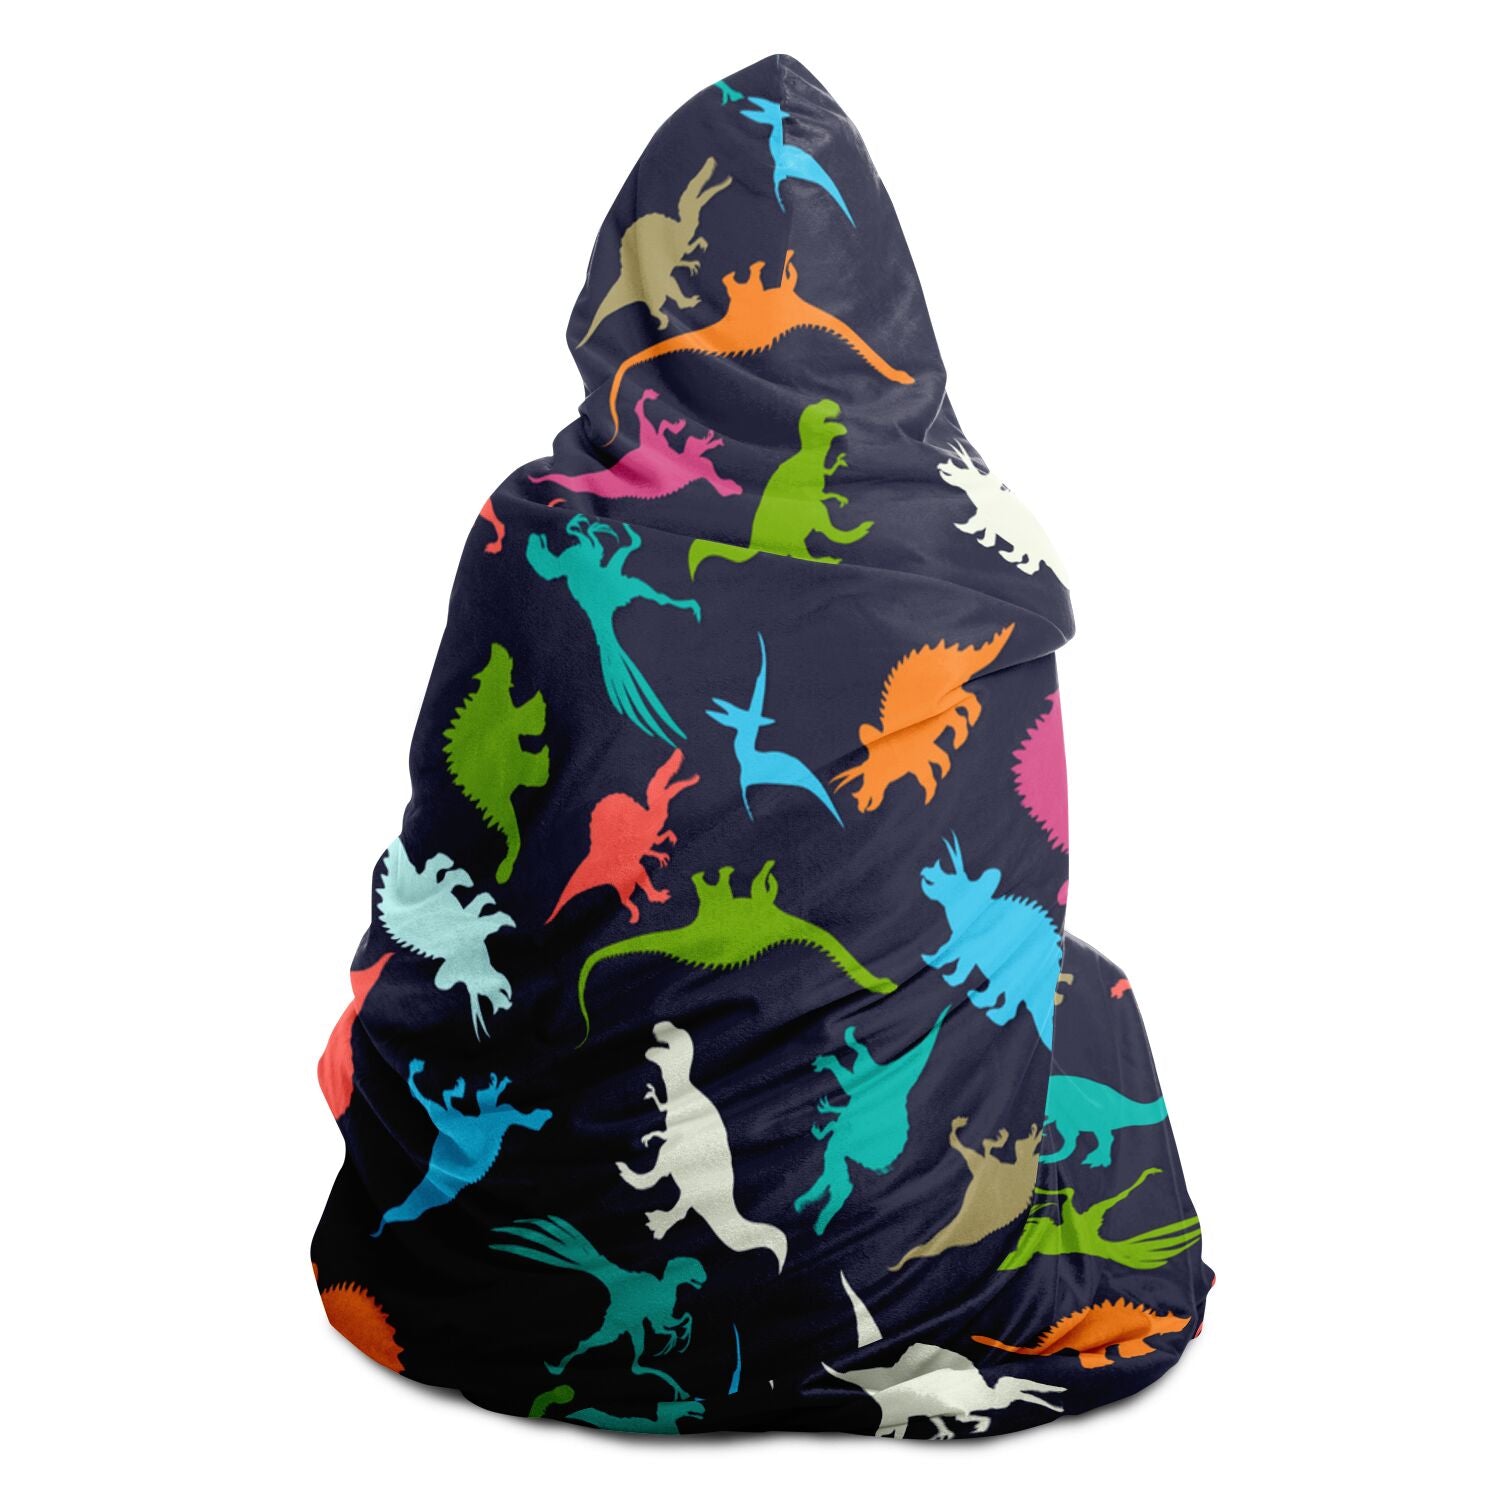 Dinosaurs Hooded Blanket, Dino Sherpa Fleece Soft Fluffy Cozy Warm Adult Men Women Kids Large Giant Wearable with Hood Gift Starcove Fashion